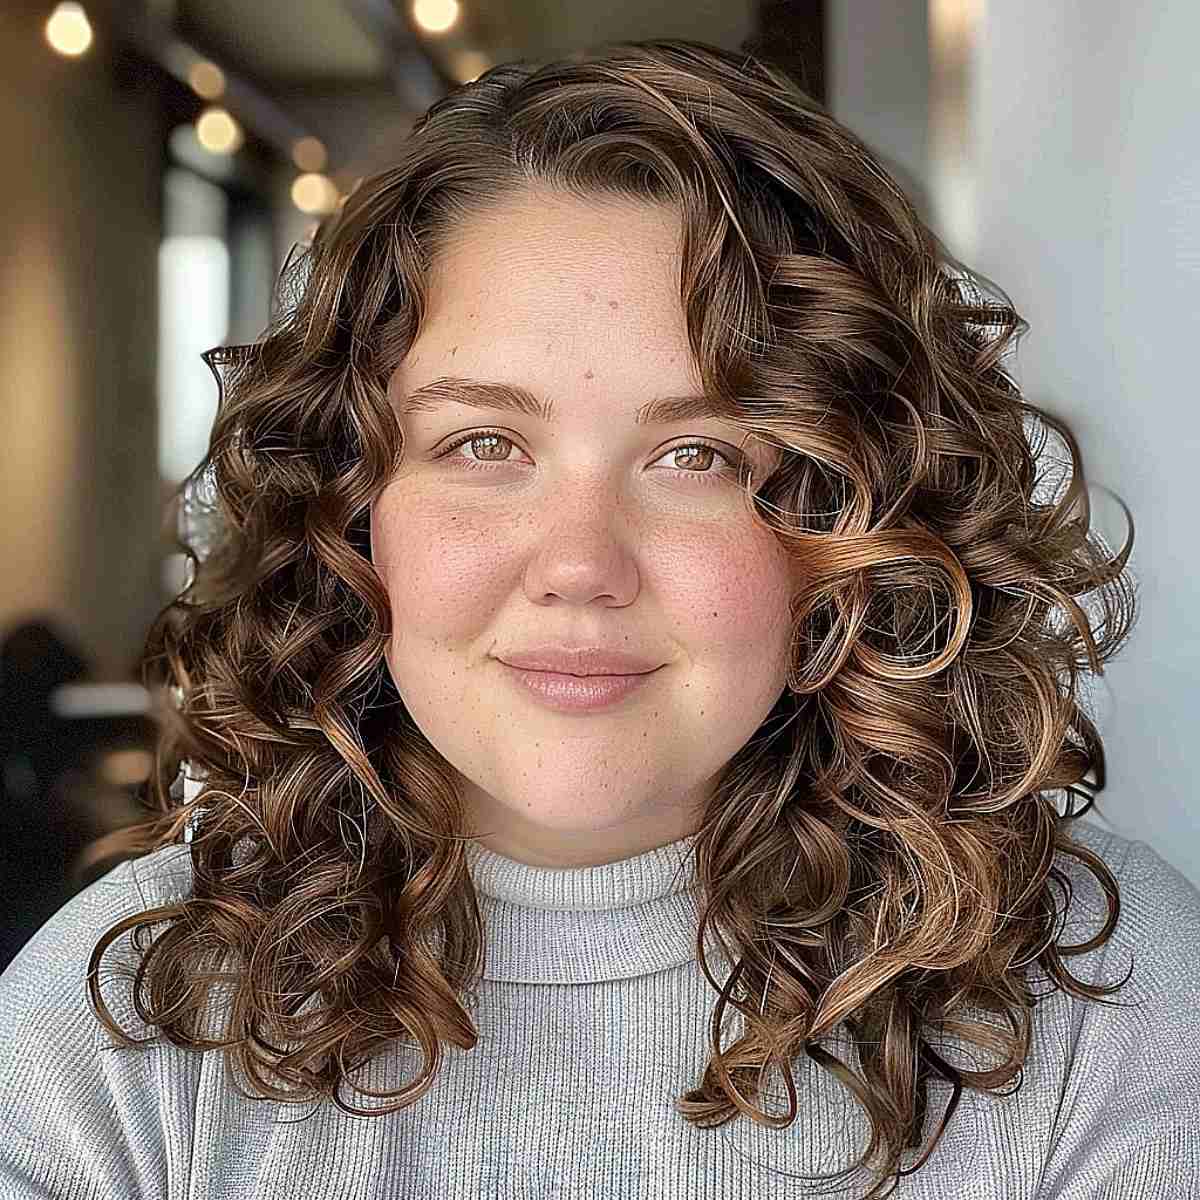 Stunning medium-length curly hairstyle for round face shapes